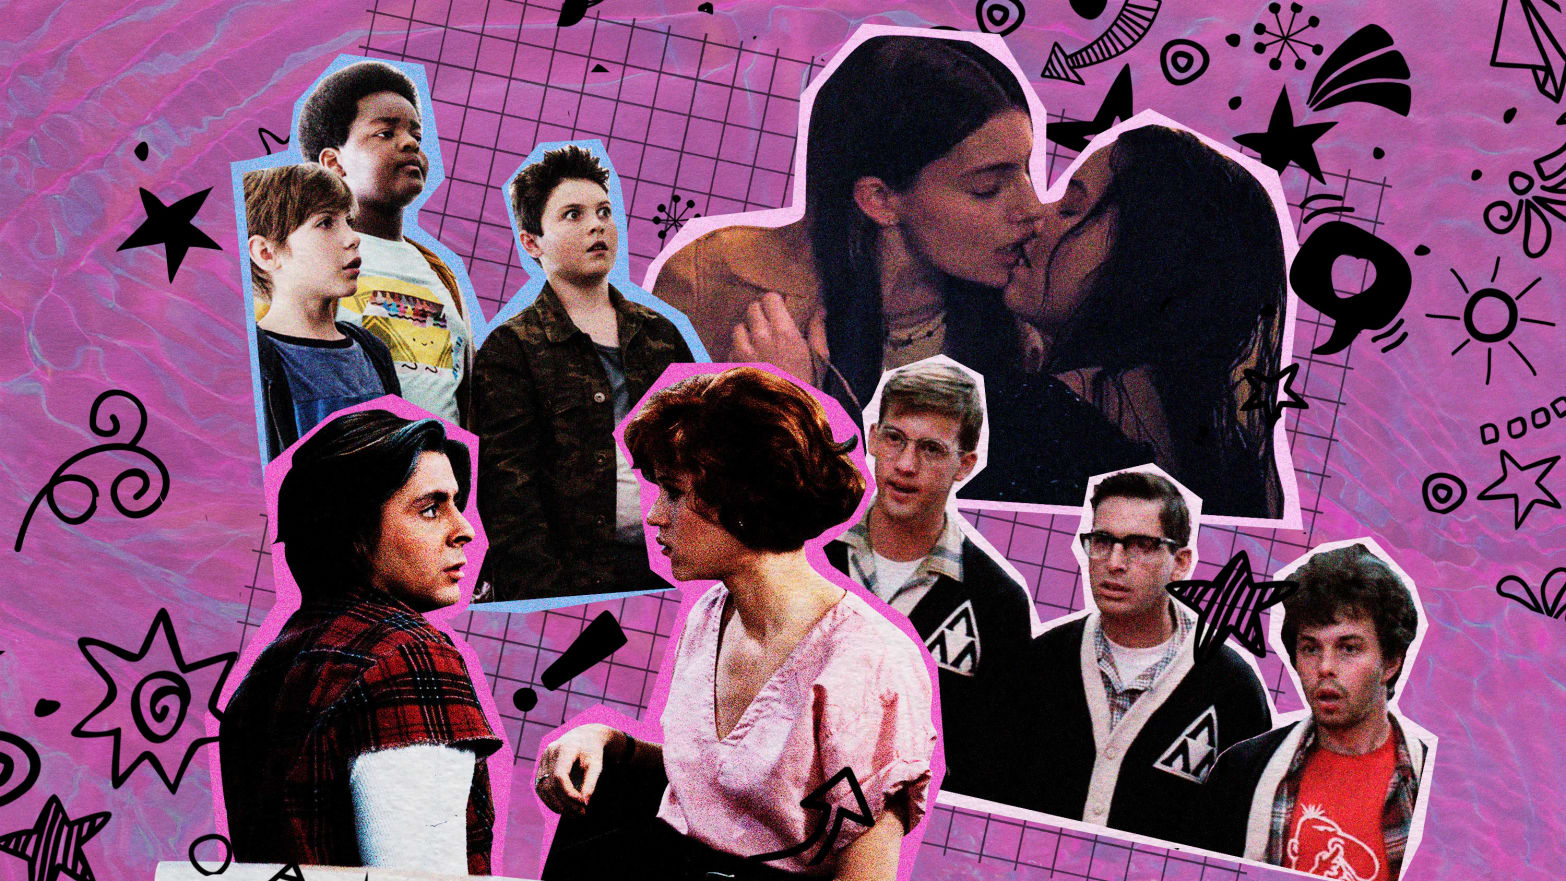 Teen Movies Still Arent Getting Sex and Consent Right, Says Michelle Meek image